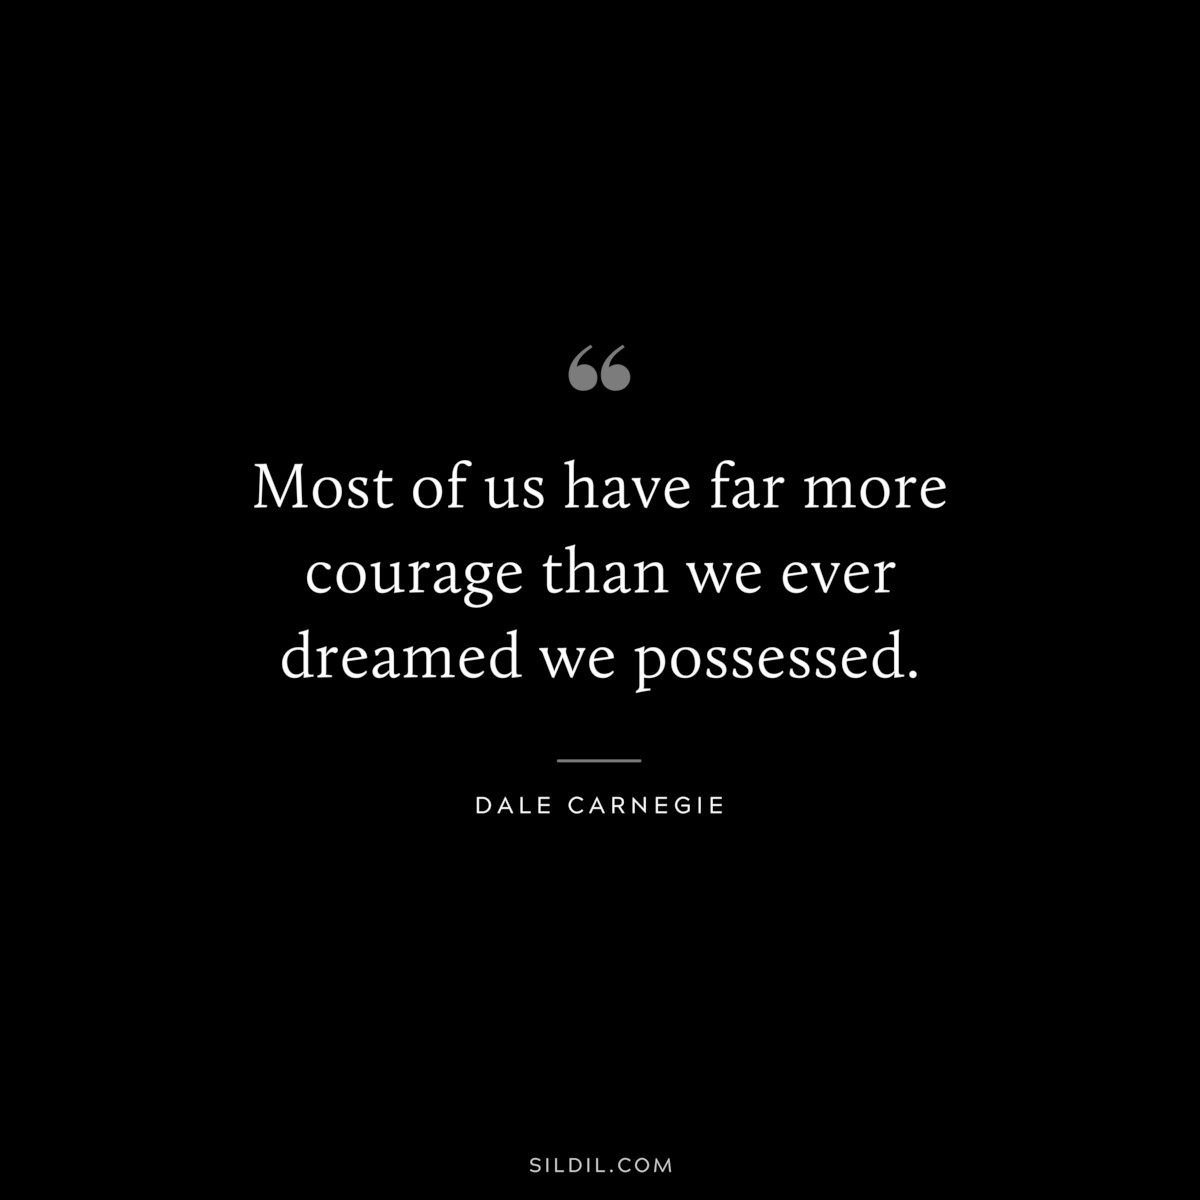 Most of us have far more courage than we ever dreamed we possessed.― Dale Carnegie